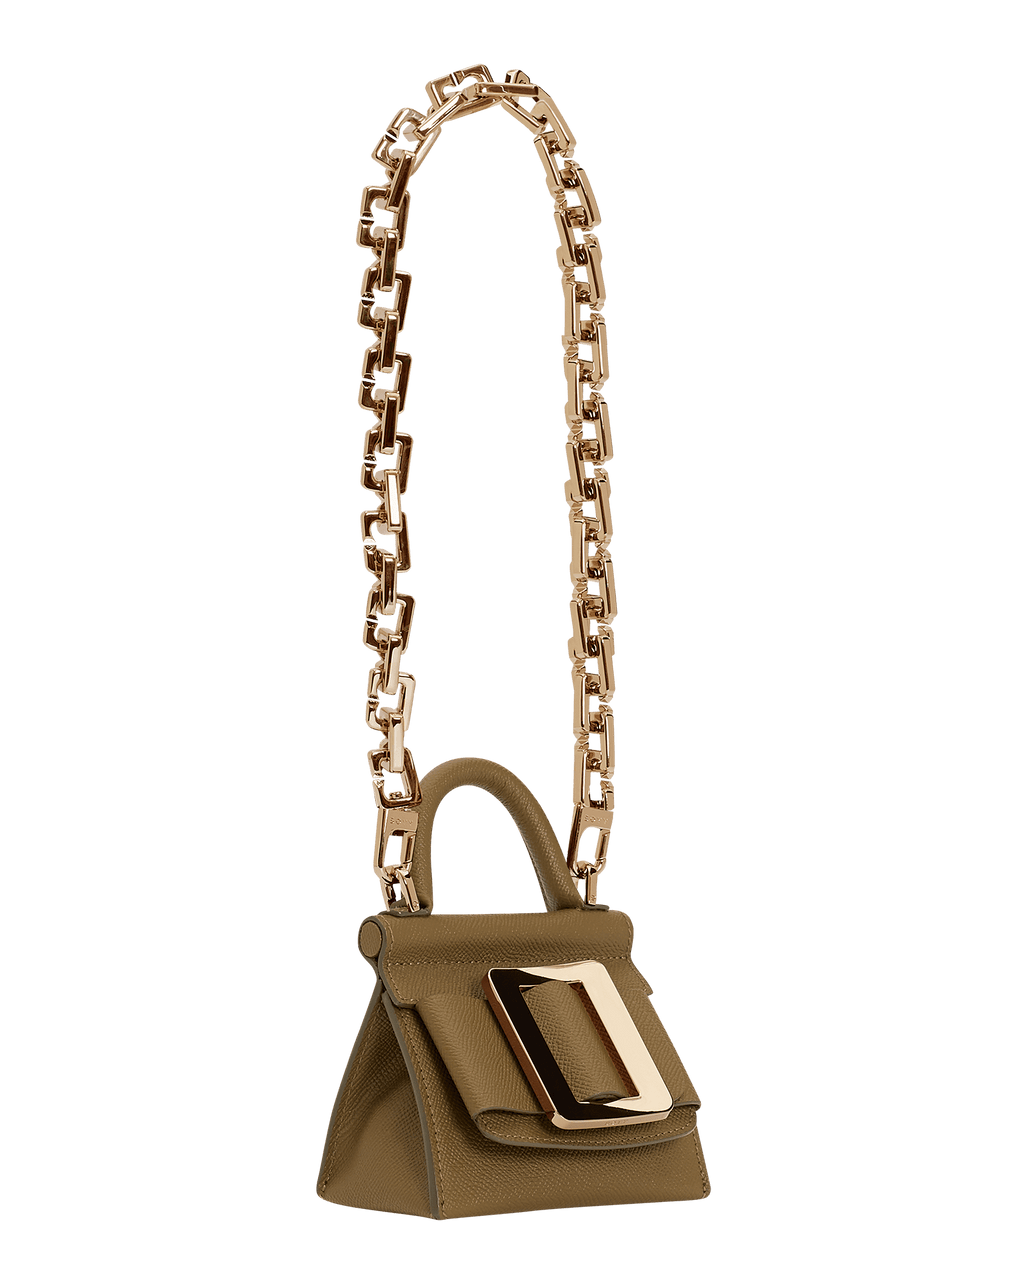 Brown, micro bag with a buckle on the front, with single carry handle, carry strap, and front flap closure. Made with grained calfskin leather.